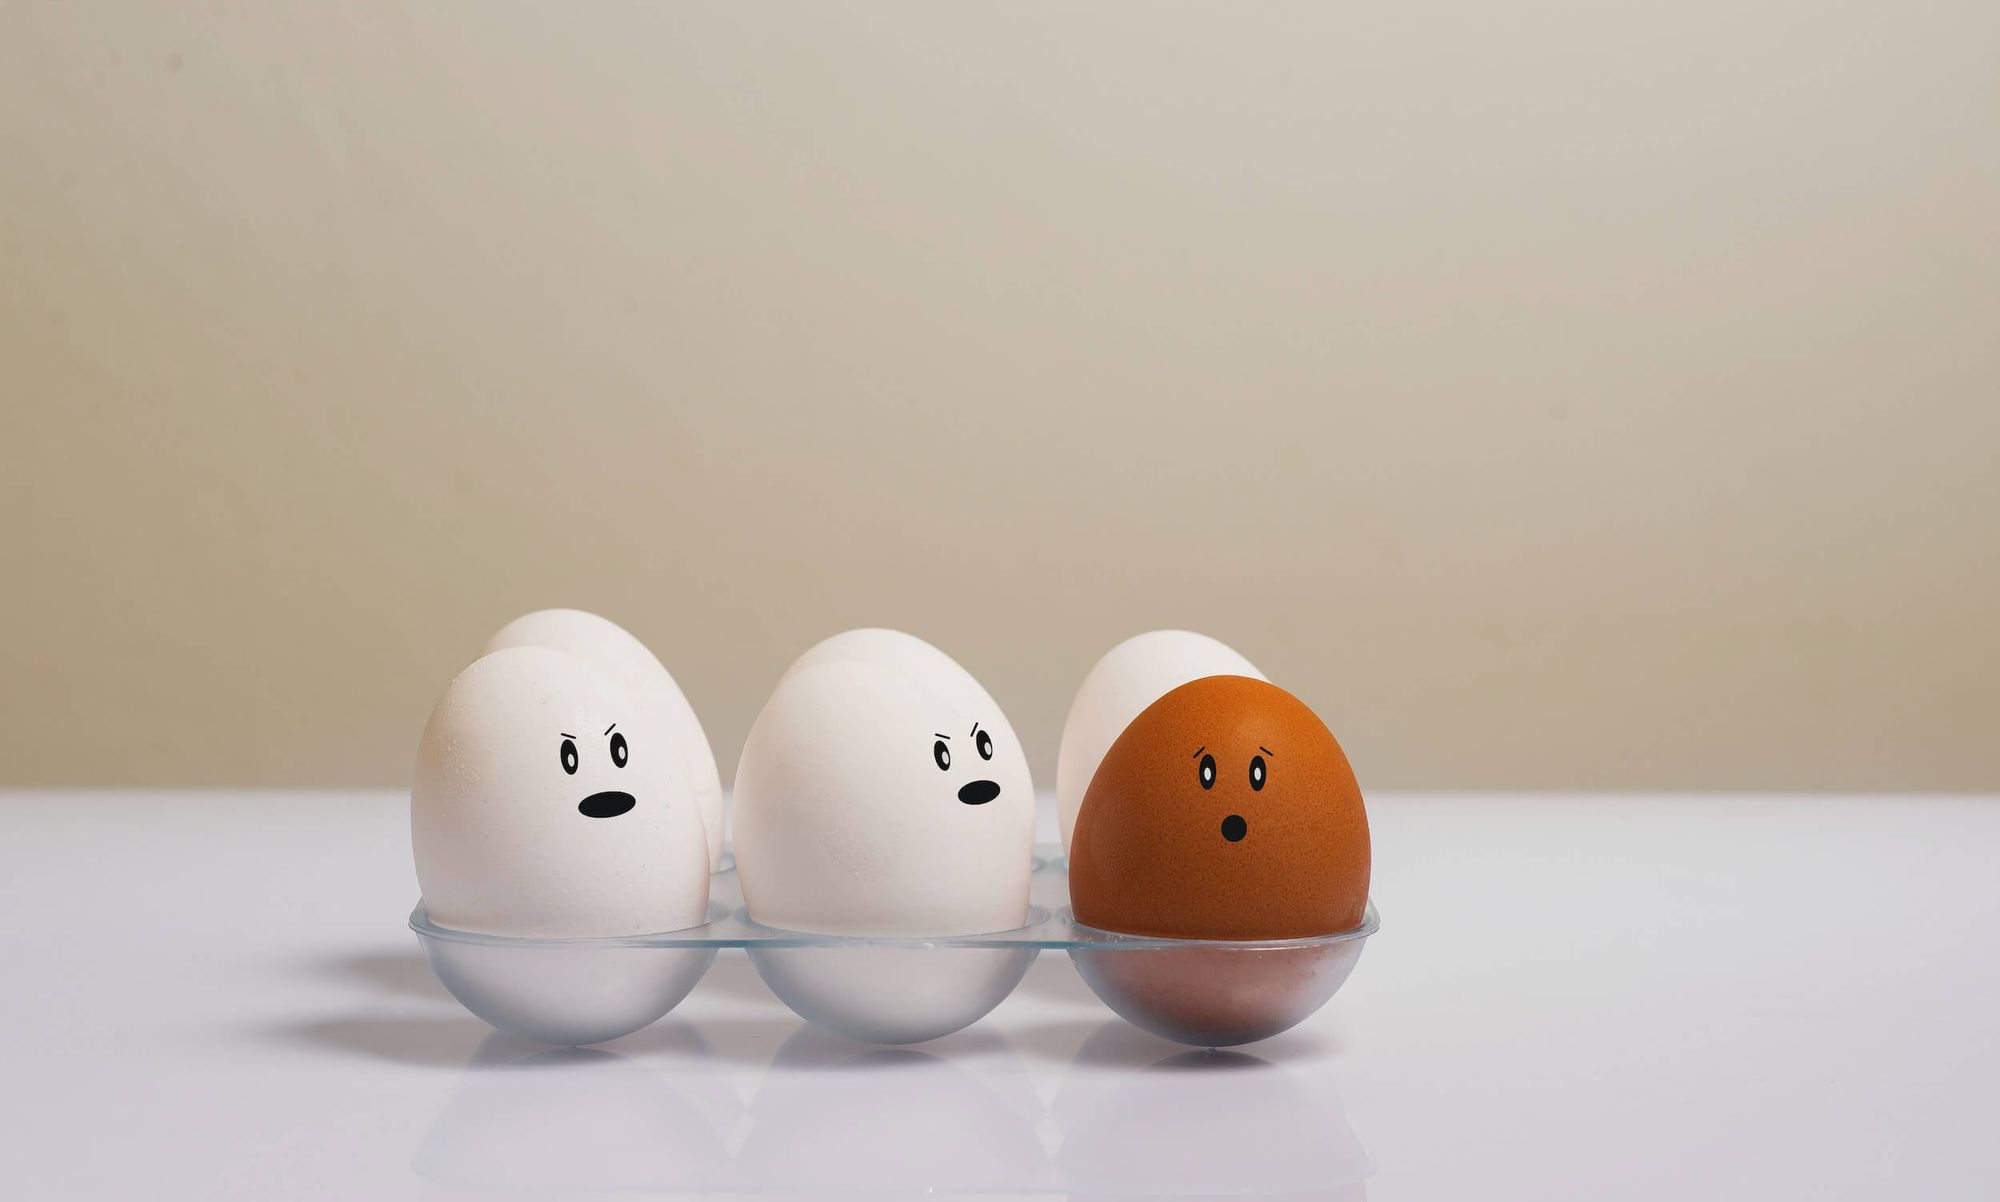 White eggs in an egg holder with one brown egg with shocked face drawn on it